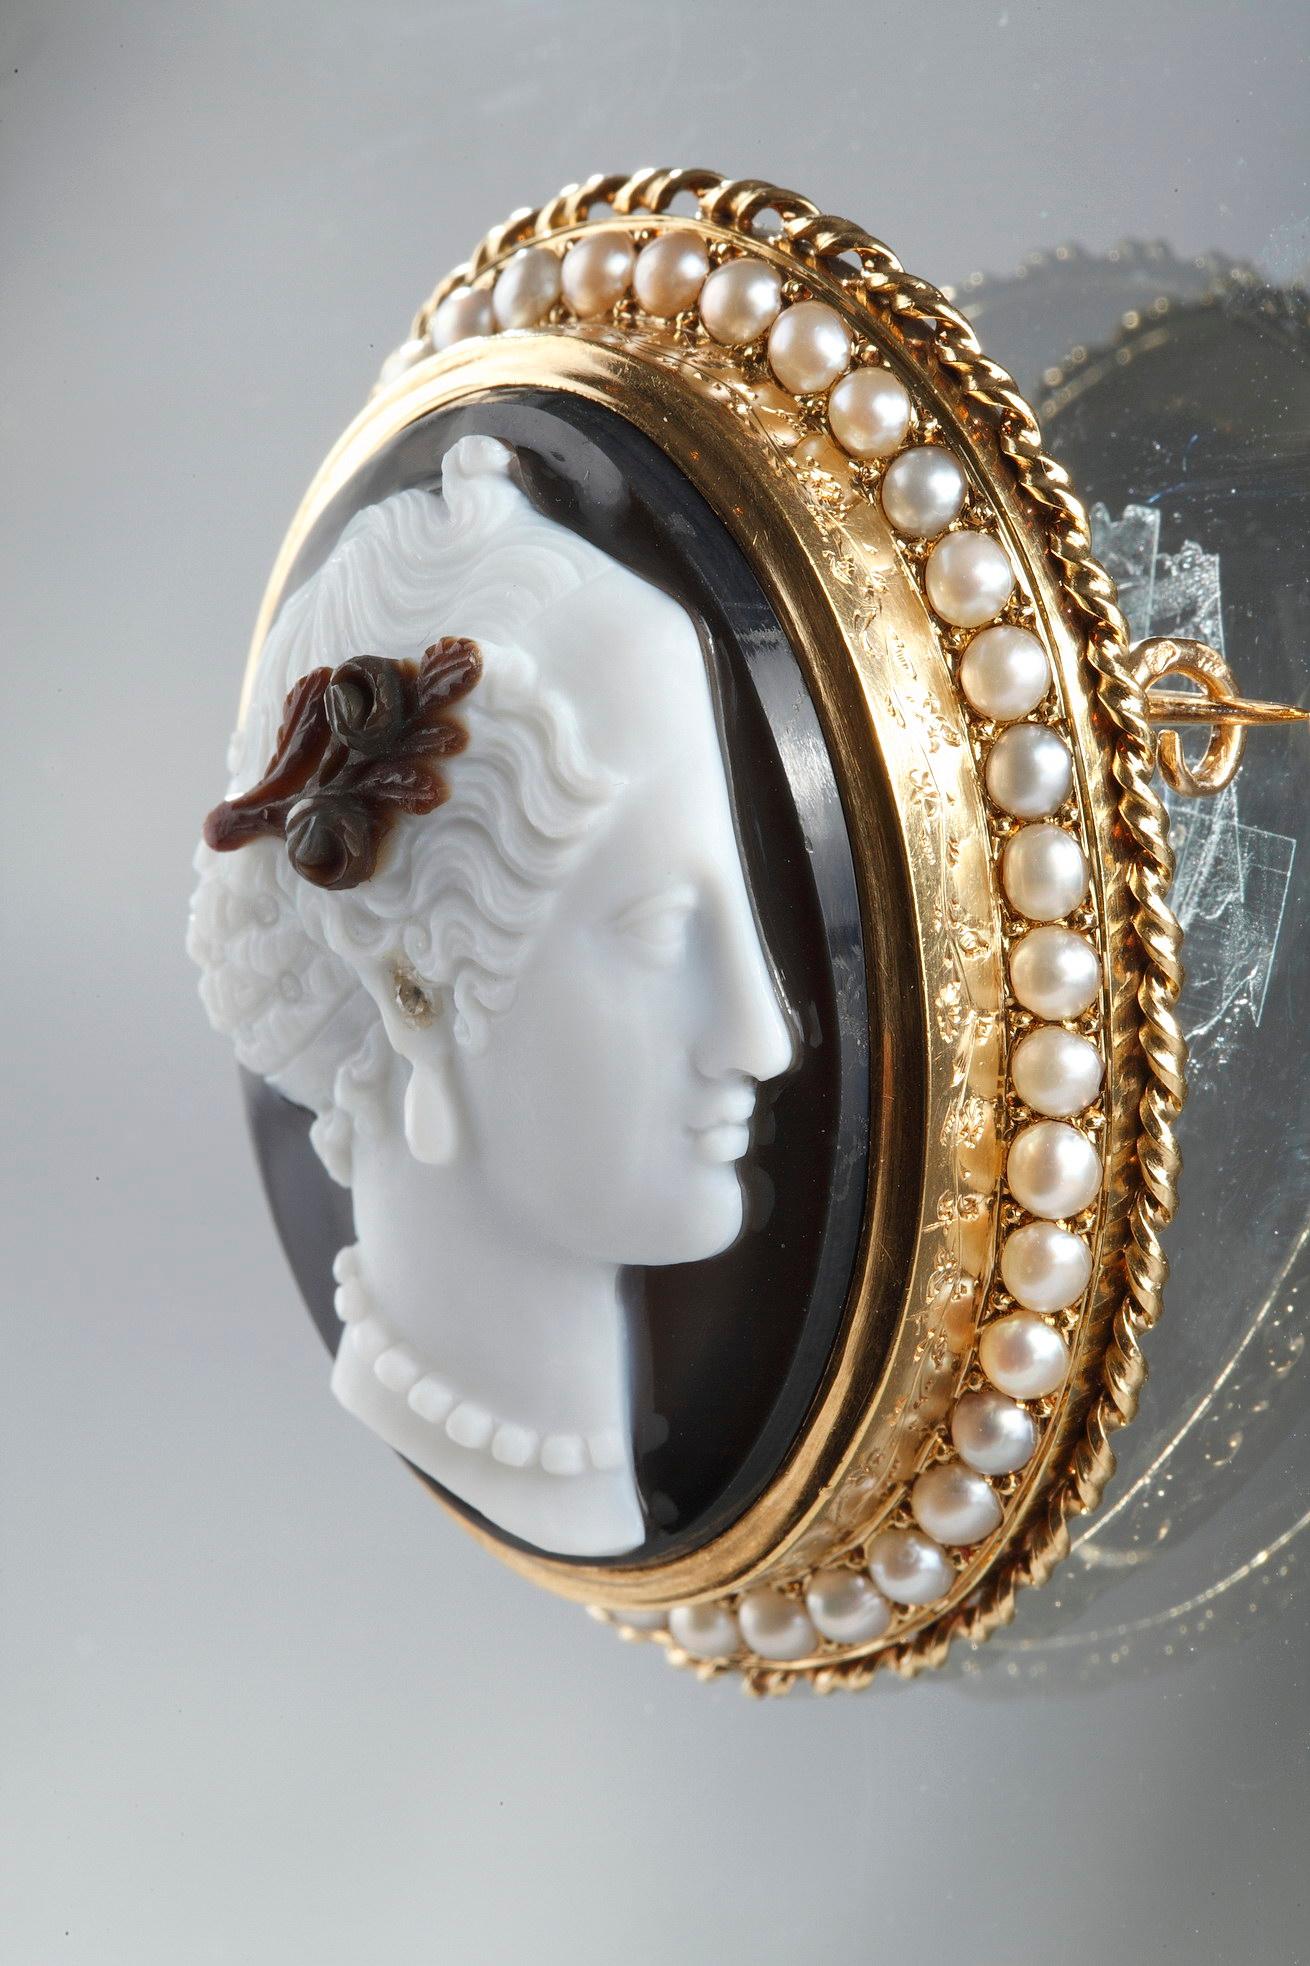 Gold-Mounted Agate Cameo Brooch, Second Part of the 19th Century, Napoleon III 5